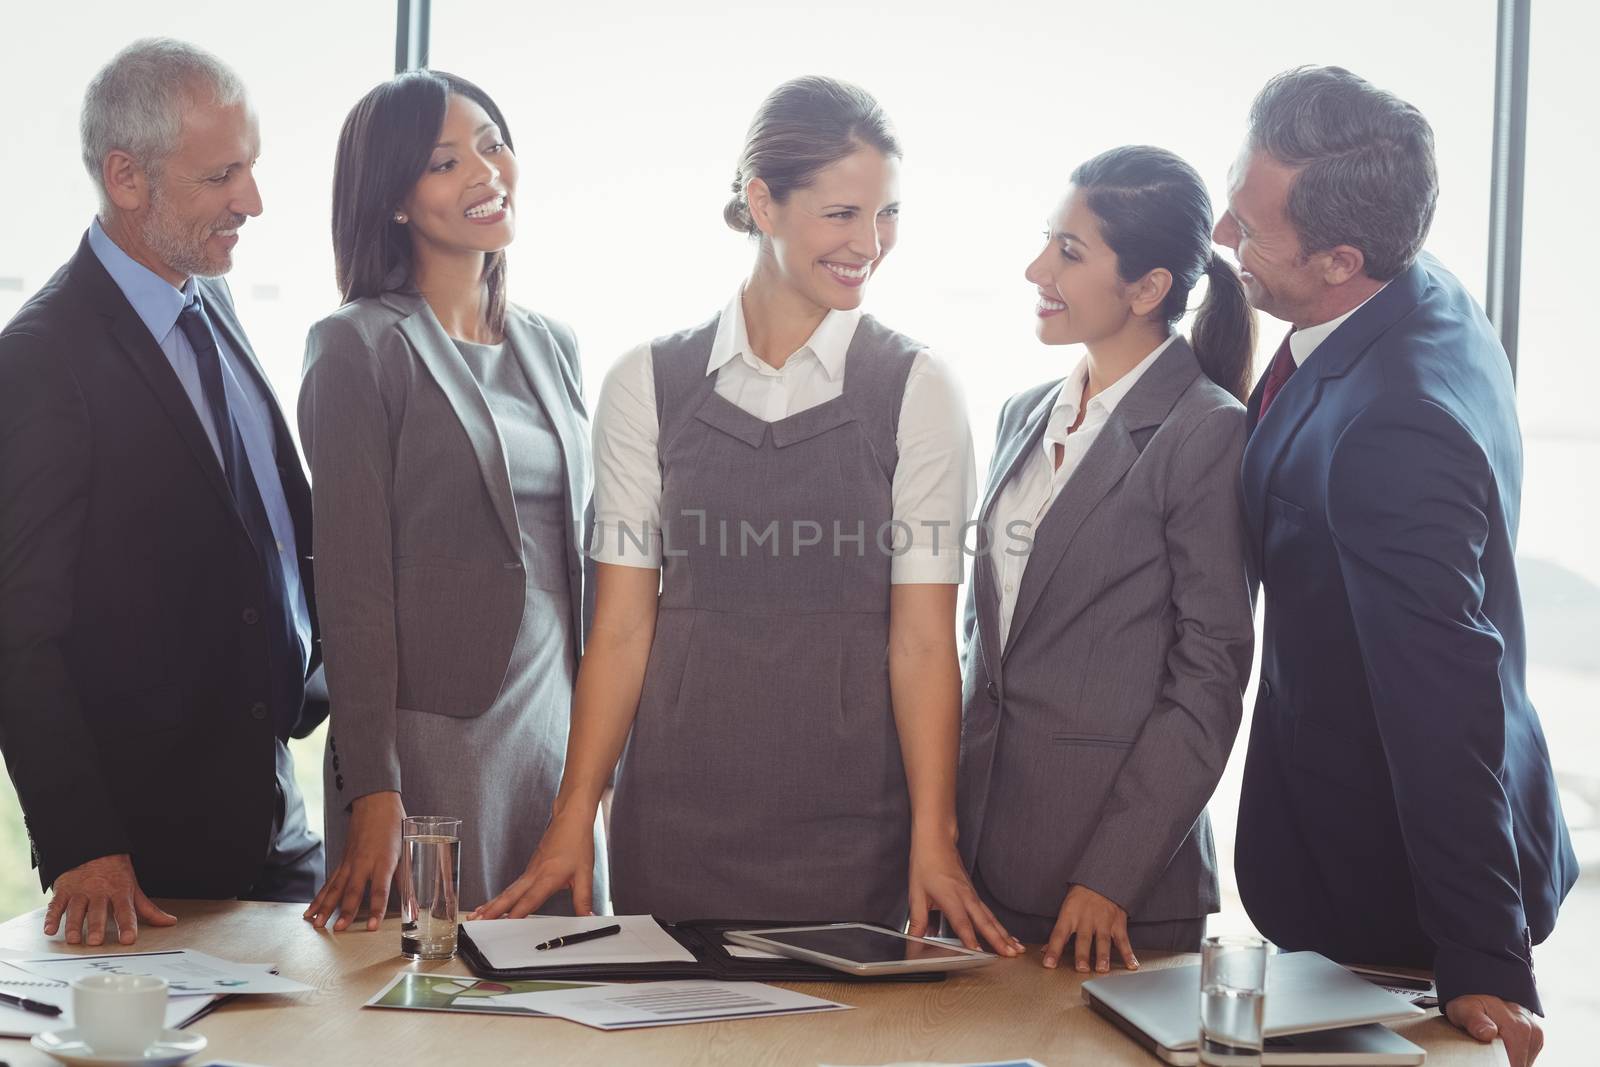 Businesspeople interacting in conference room by Wavebreakmedia